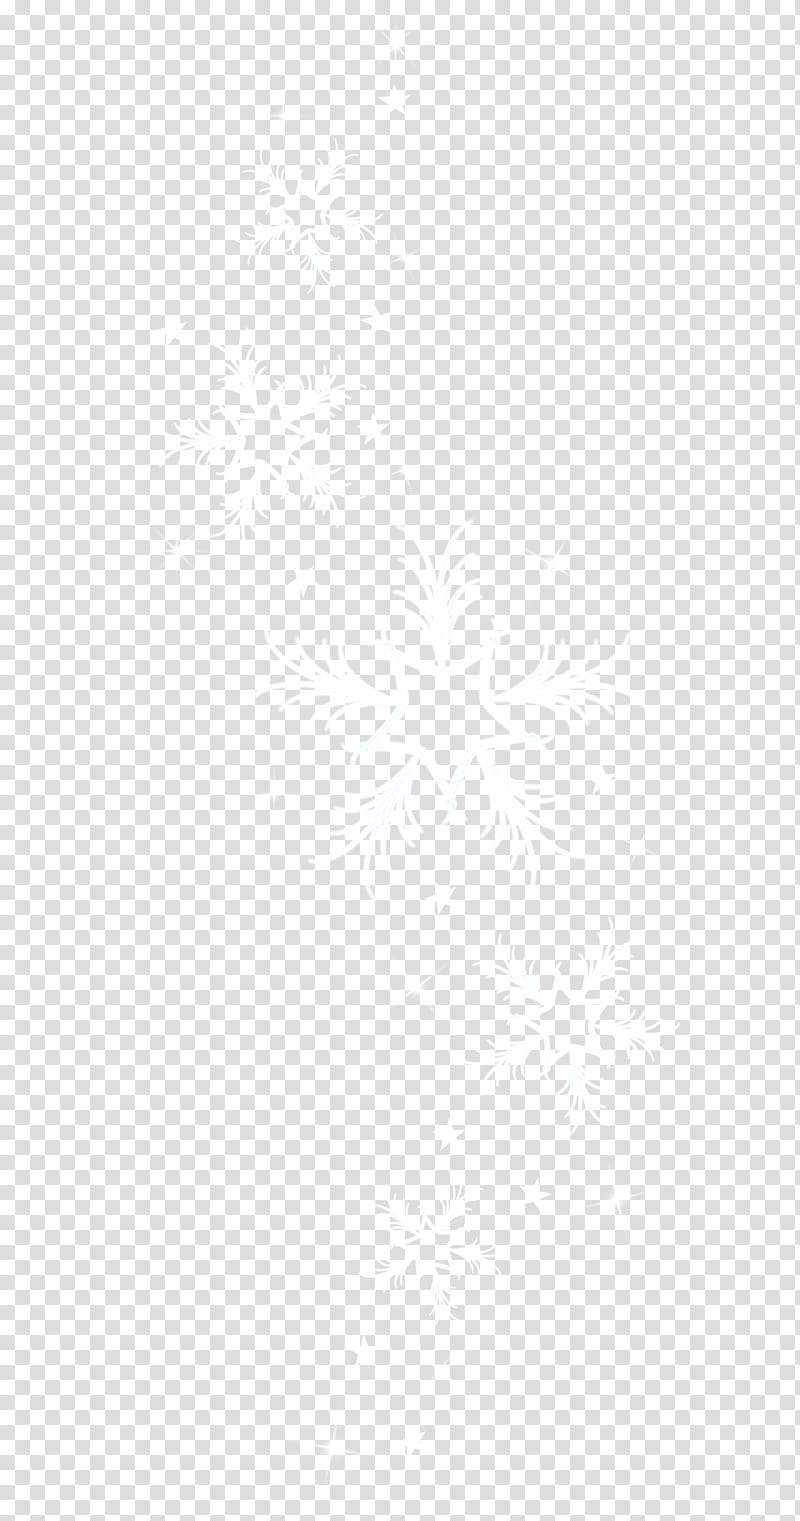 Navidad, snowflakes and stars transparent background PNG clipart